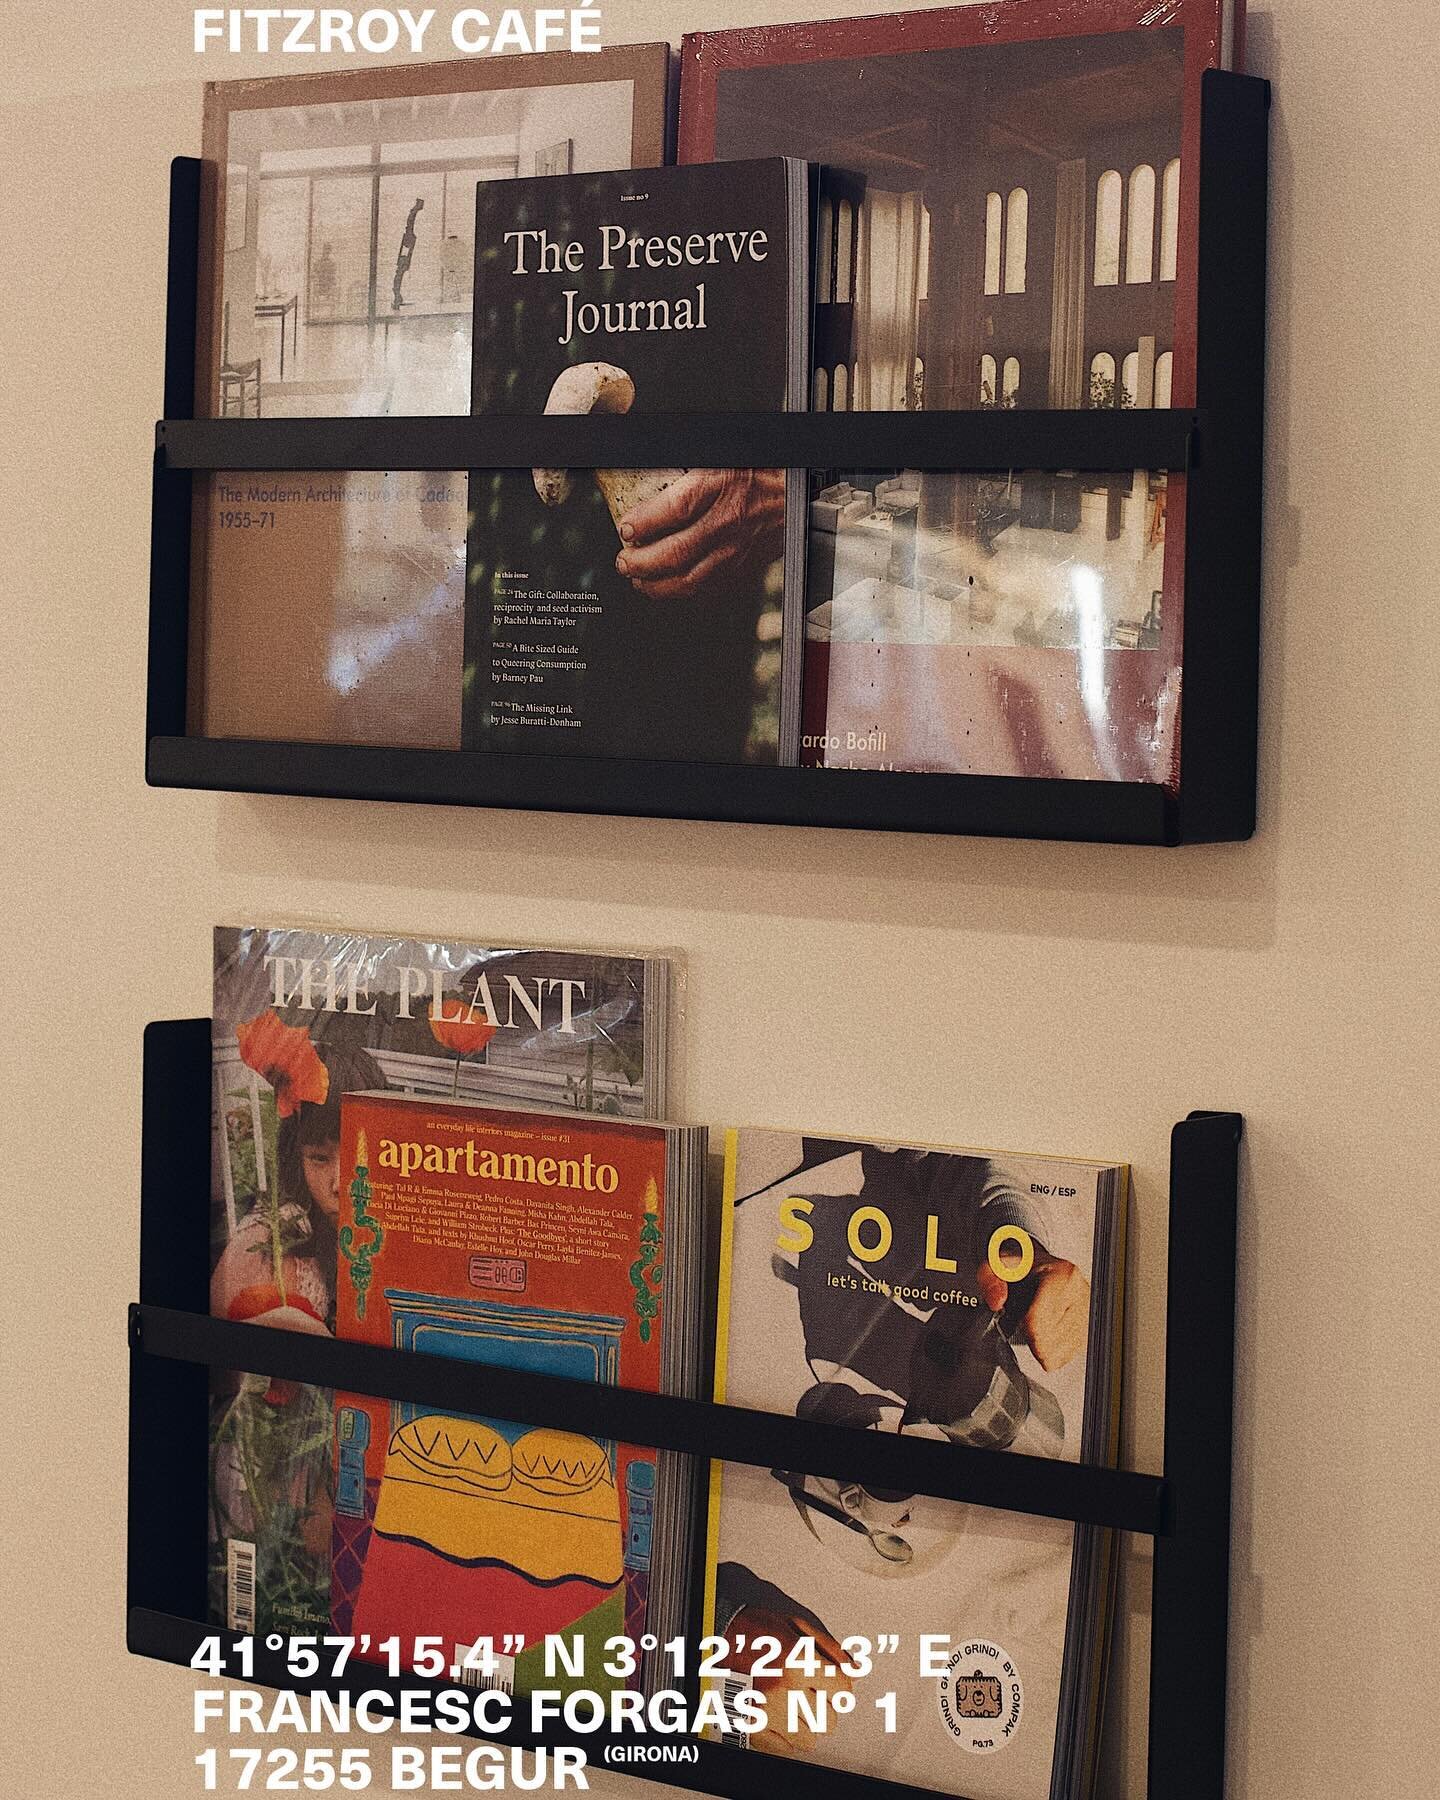 Make your breakfasts and meals at Fitzroy Café even more special! 📚 We now SELL magazines such as Apartment, Solo, The Preserve Journal, as well as architecture and design books.Add